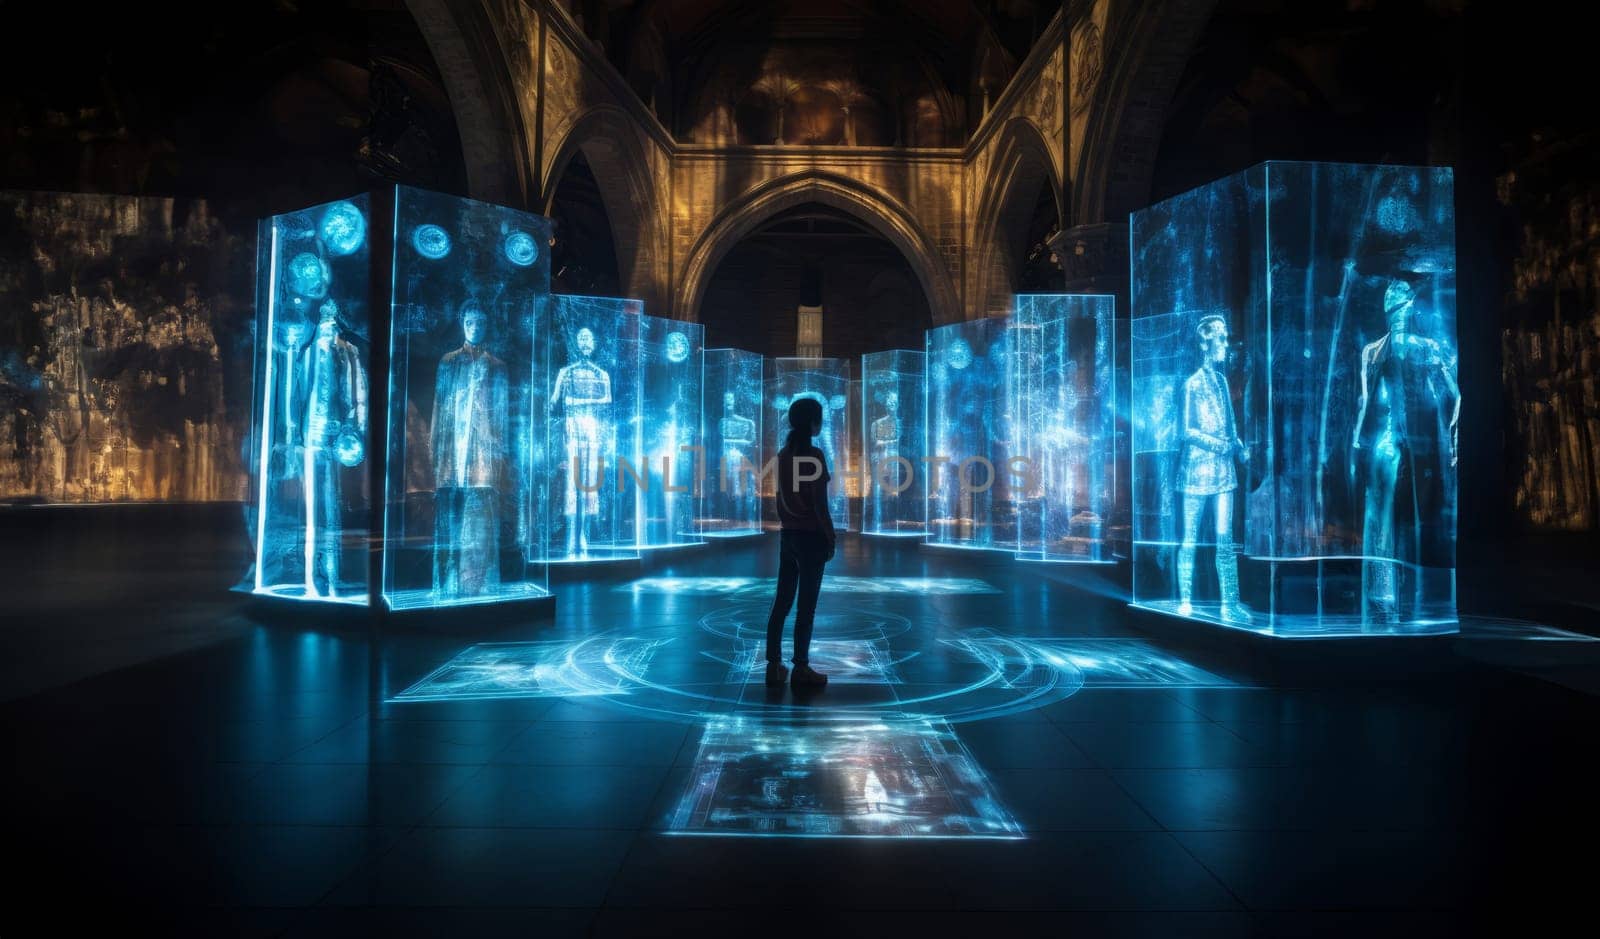 In a futuristic museum, holograms vividly depict the history of the country, showcasing its evolution and the profound changes it has undergone over time.Generated image.